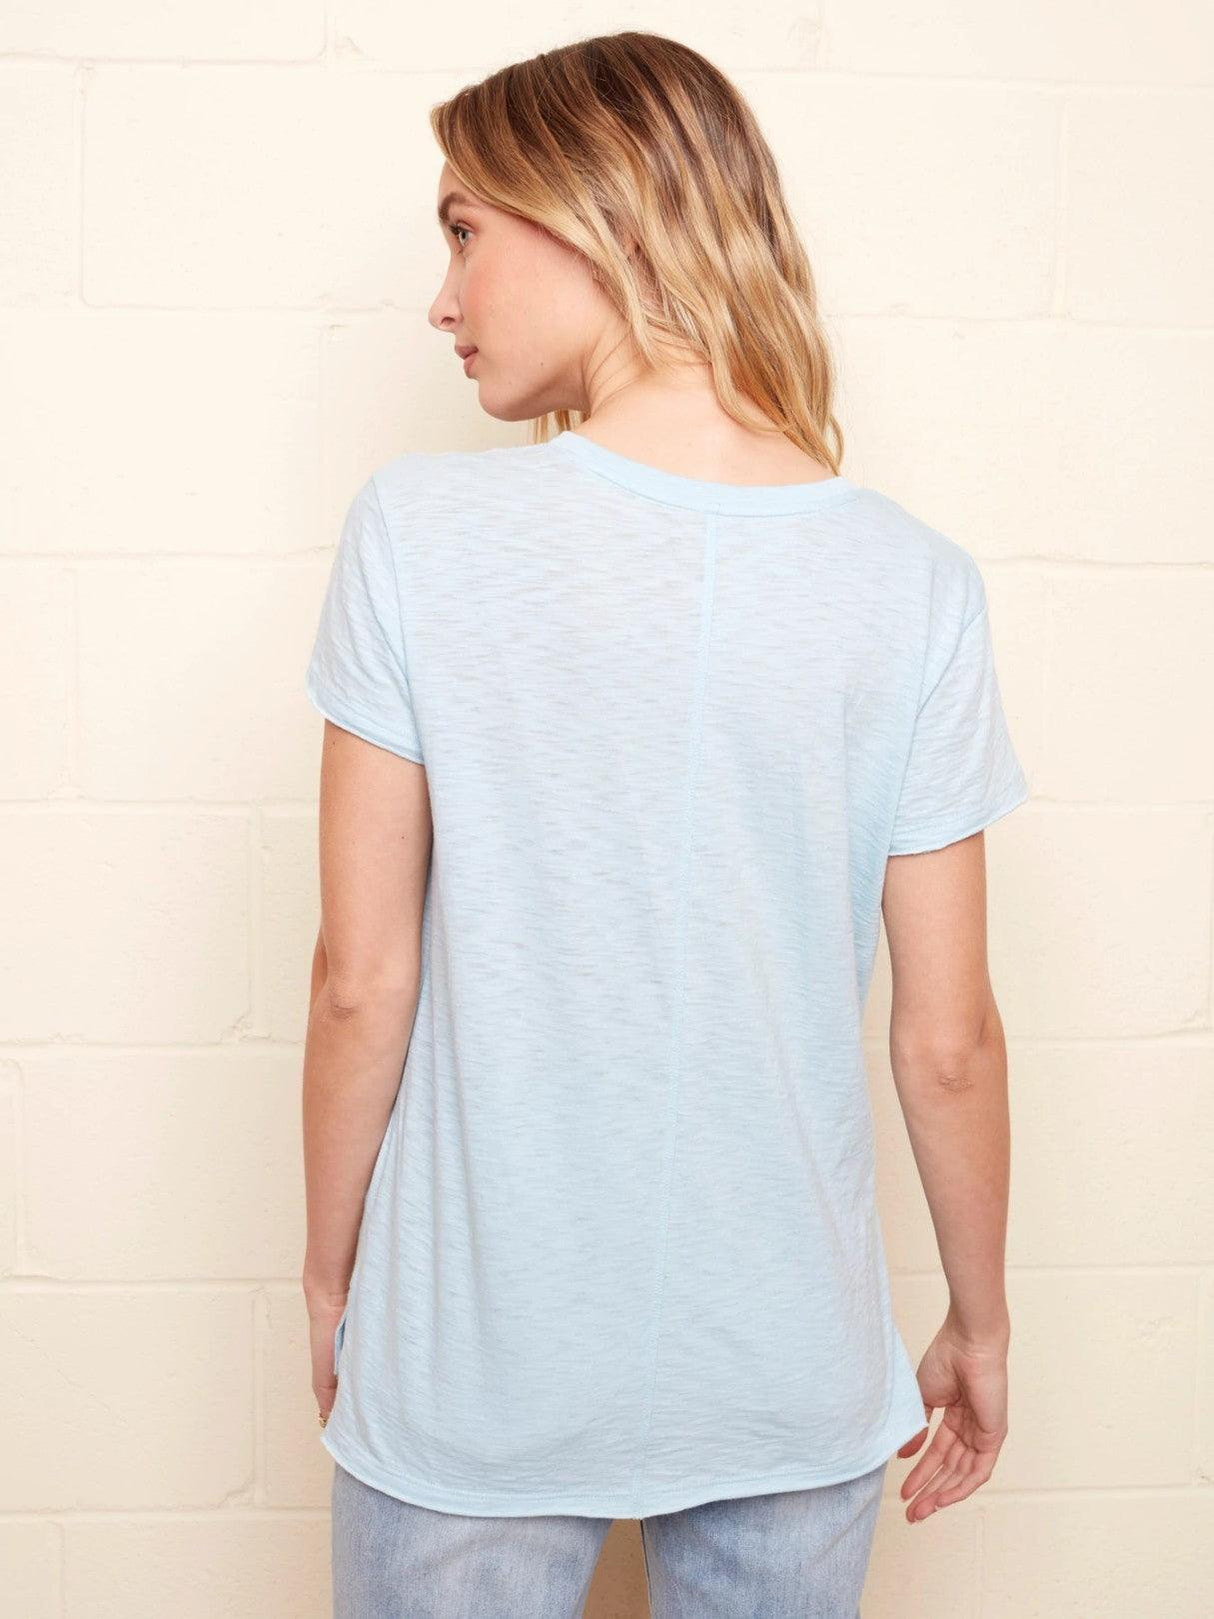 Charlie B Women's Short Sleeve Tee - A&M Clothing & Shoes